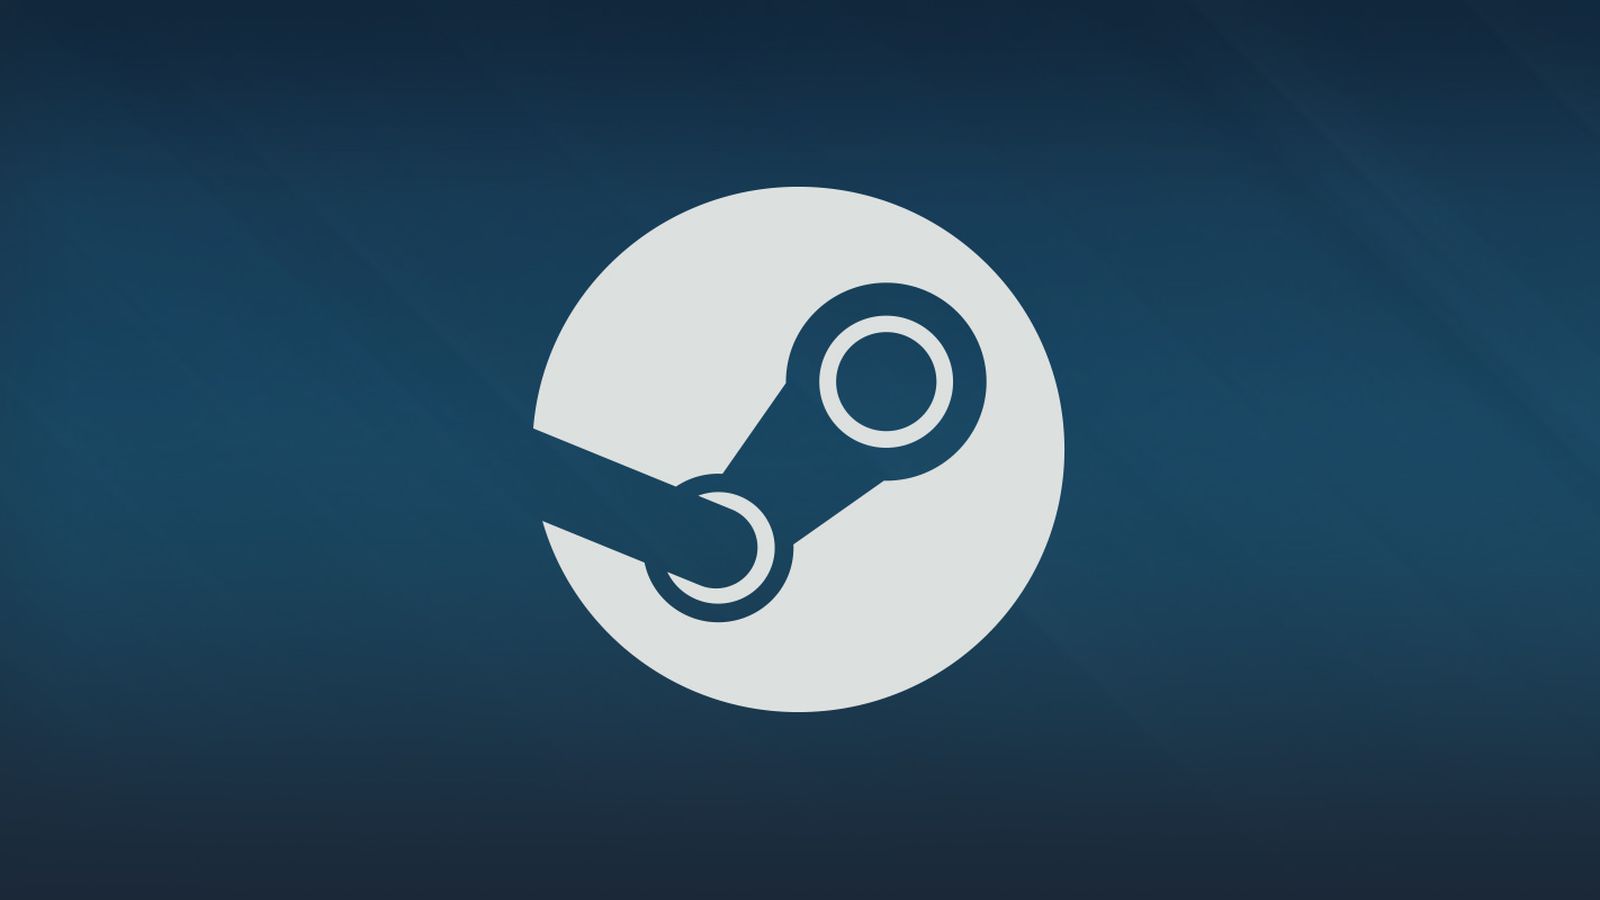 Image for Gabe Newell offers vague hint about Steam coming to consoles